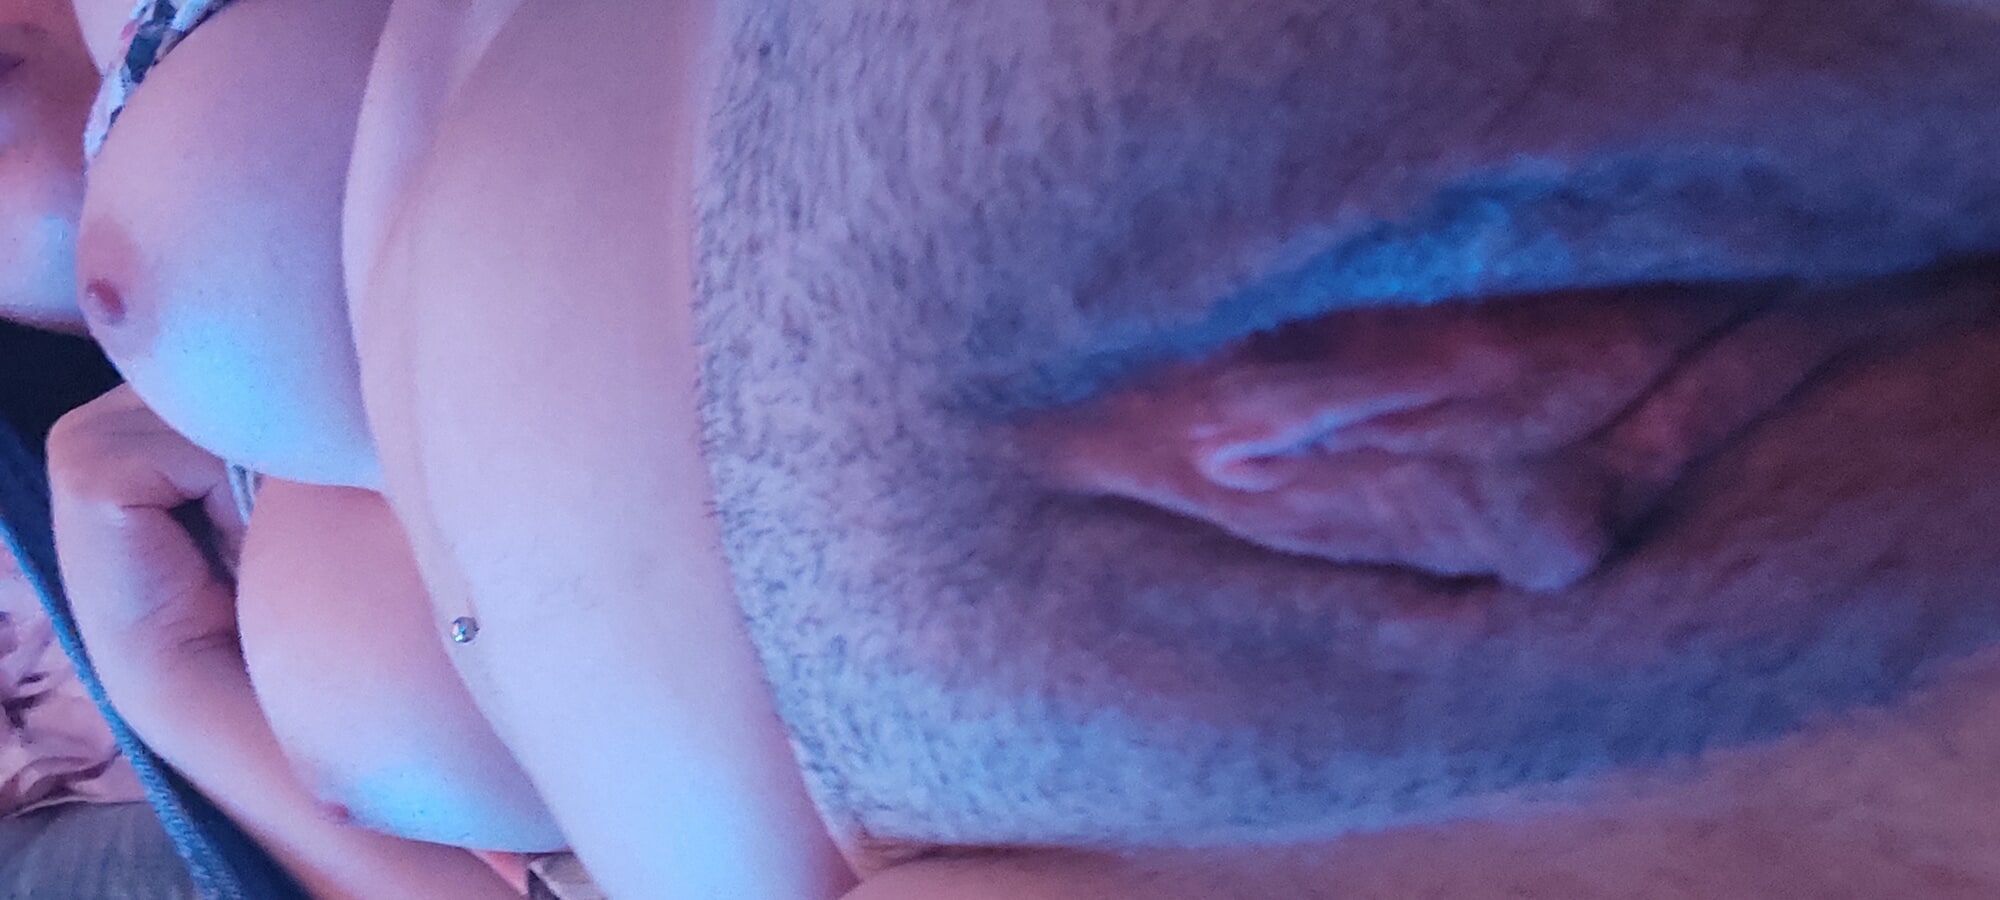 Showing my almost hairy pussy #2